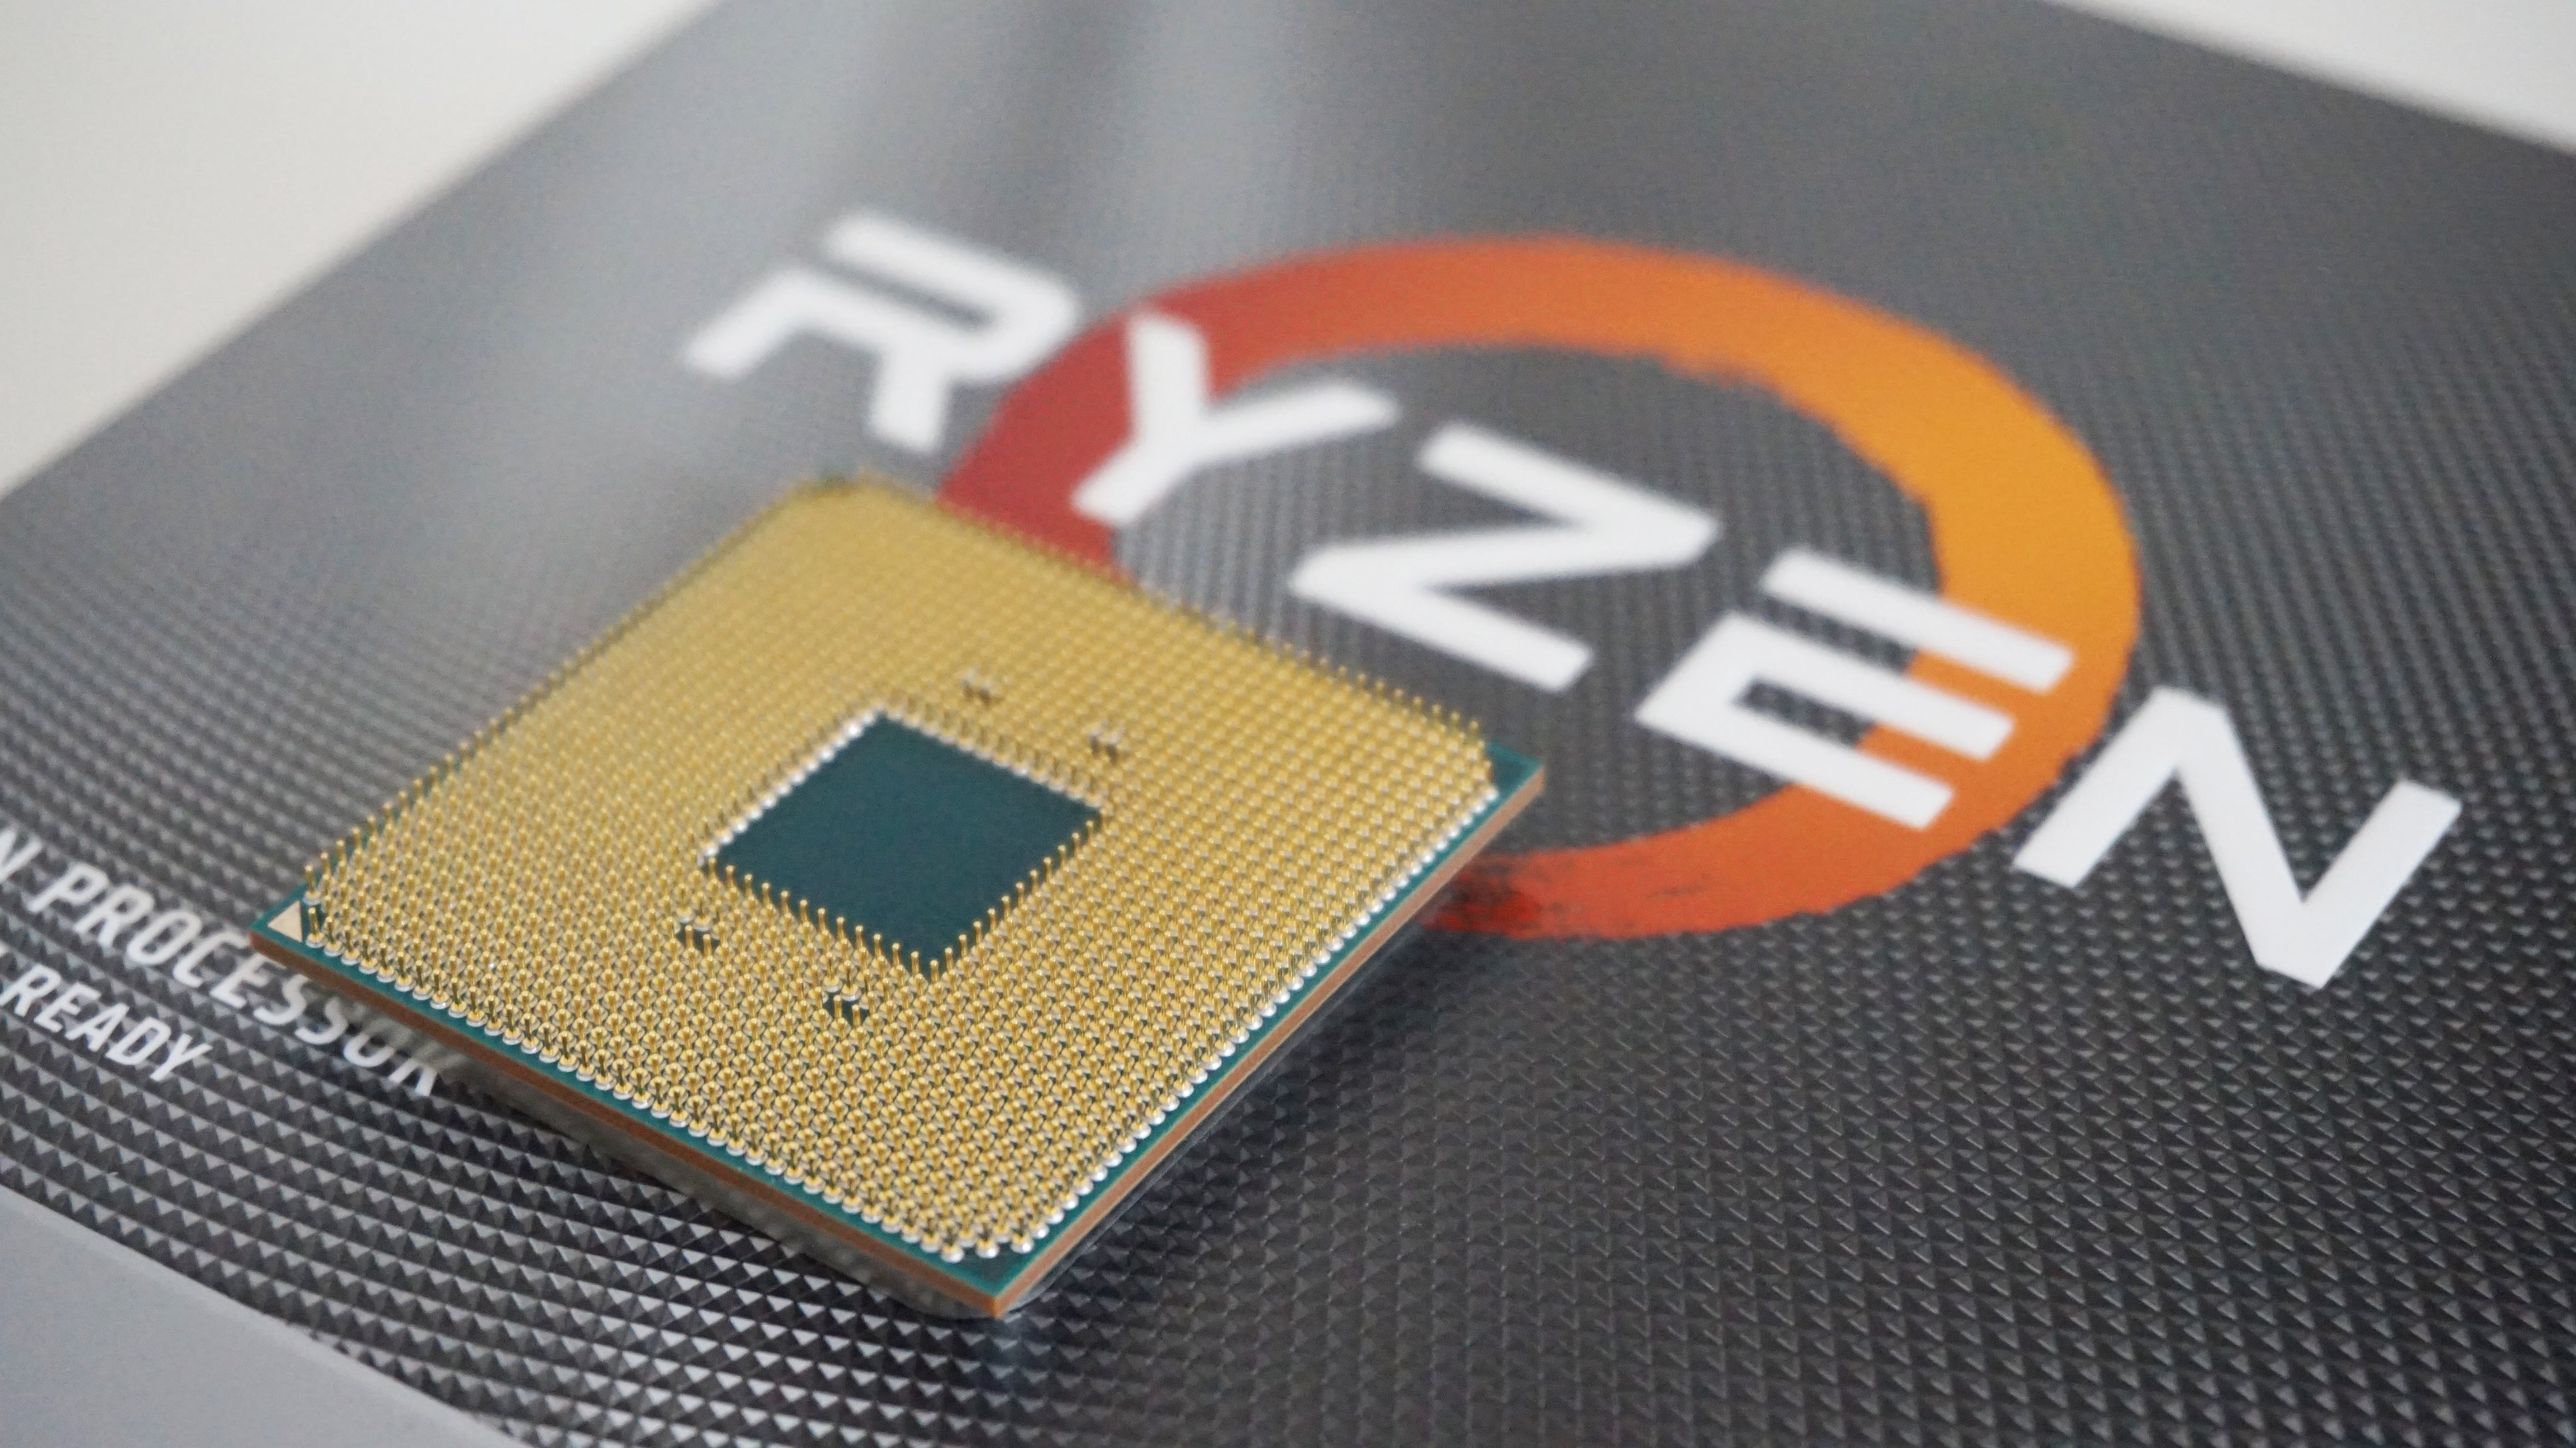 The excellent Ryzen 5 3600 is now under £150, but should you get a